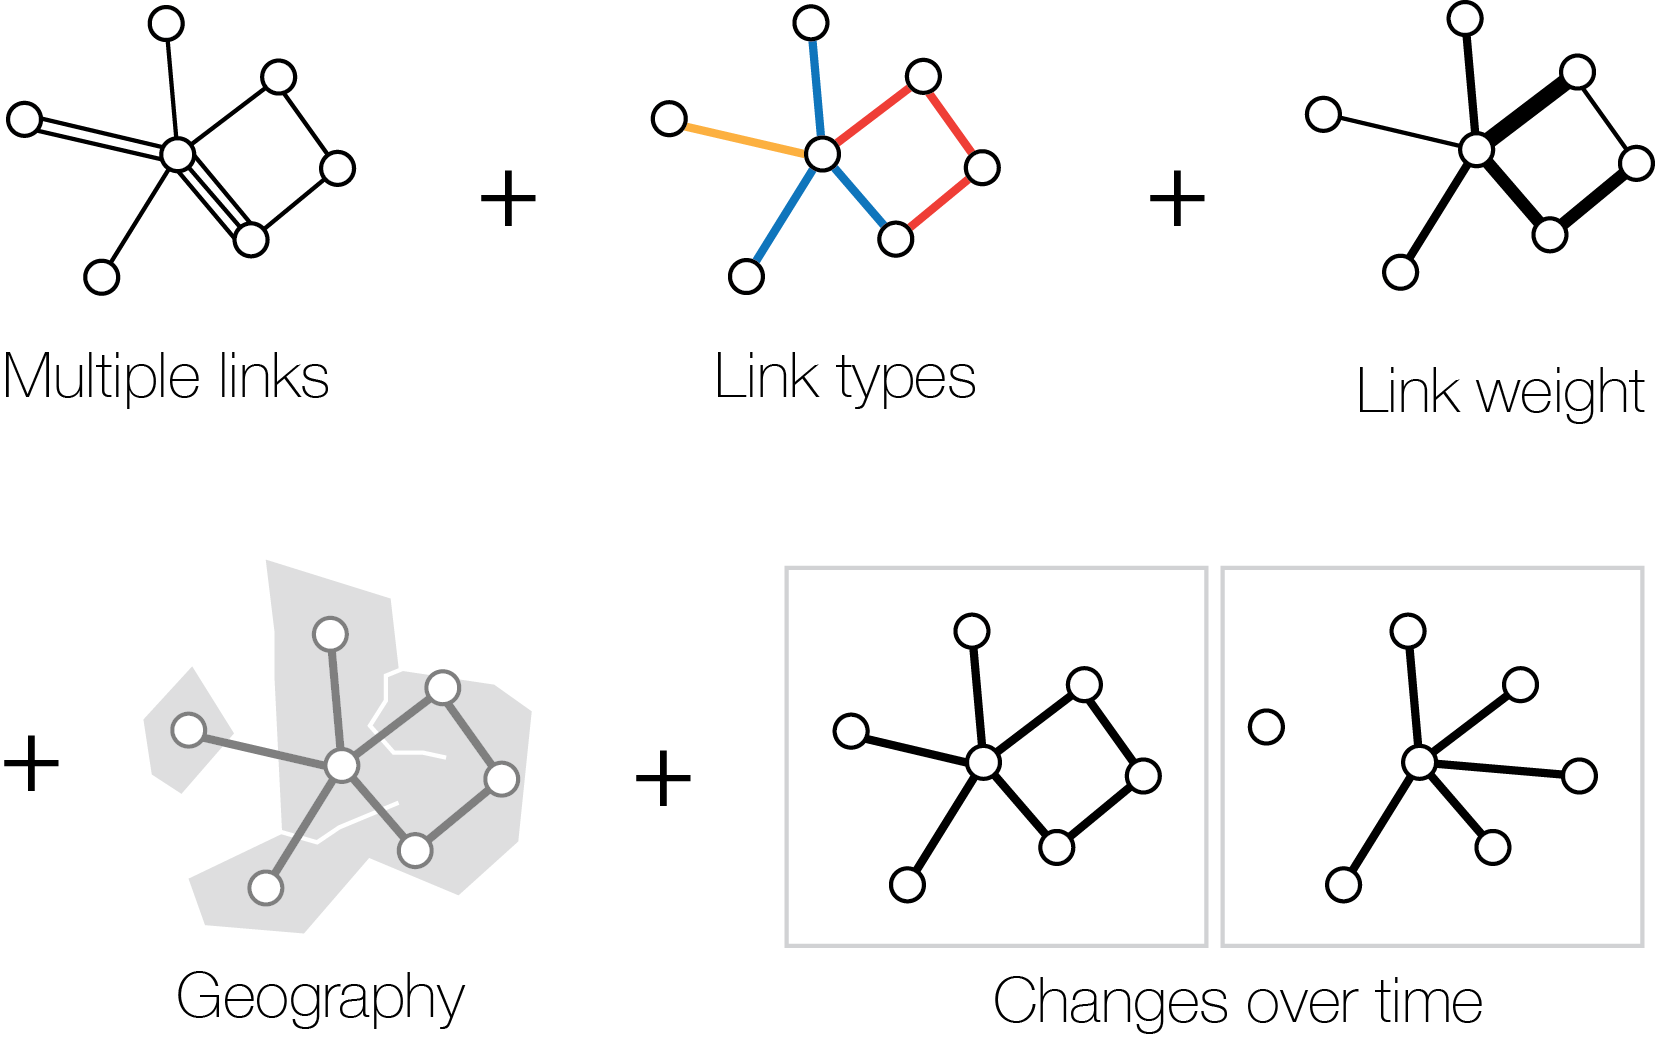 Diagram shwoing how multiple links, link types, link weights, geography, and changes over time are represented in the Vistorian.